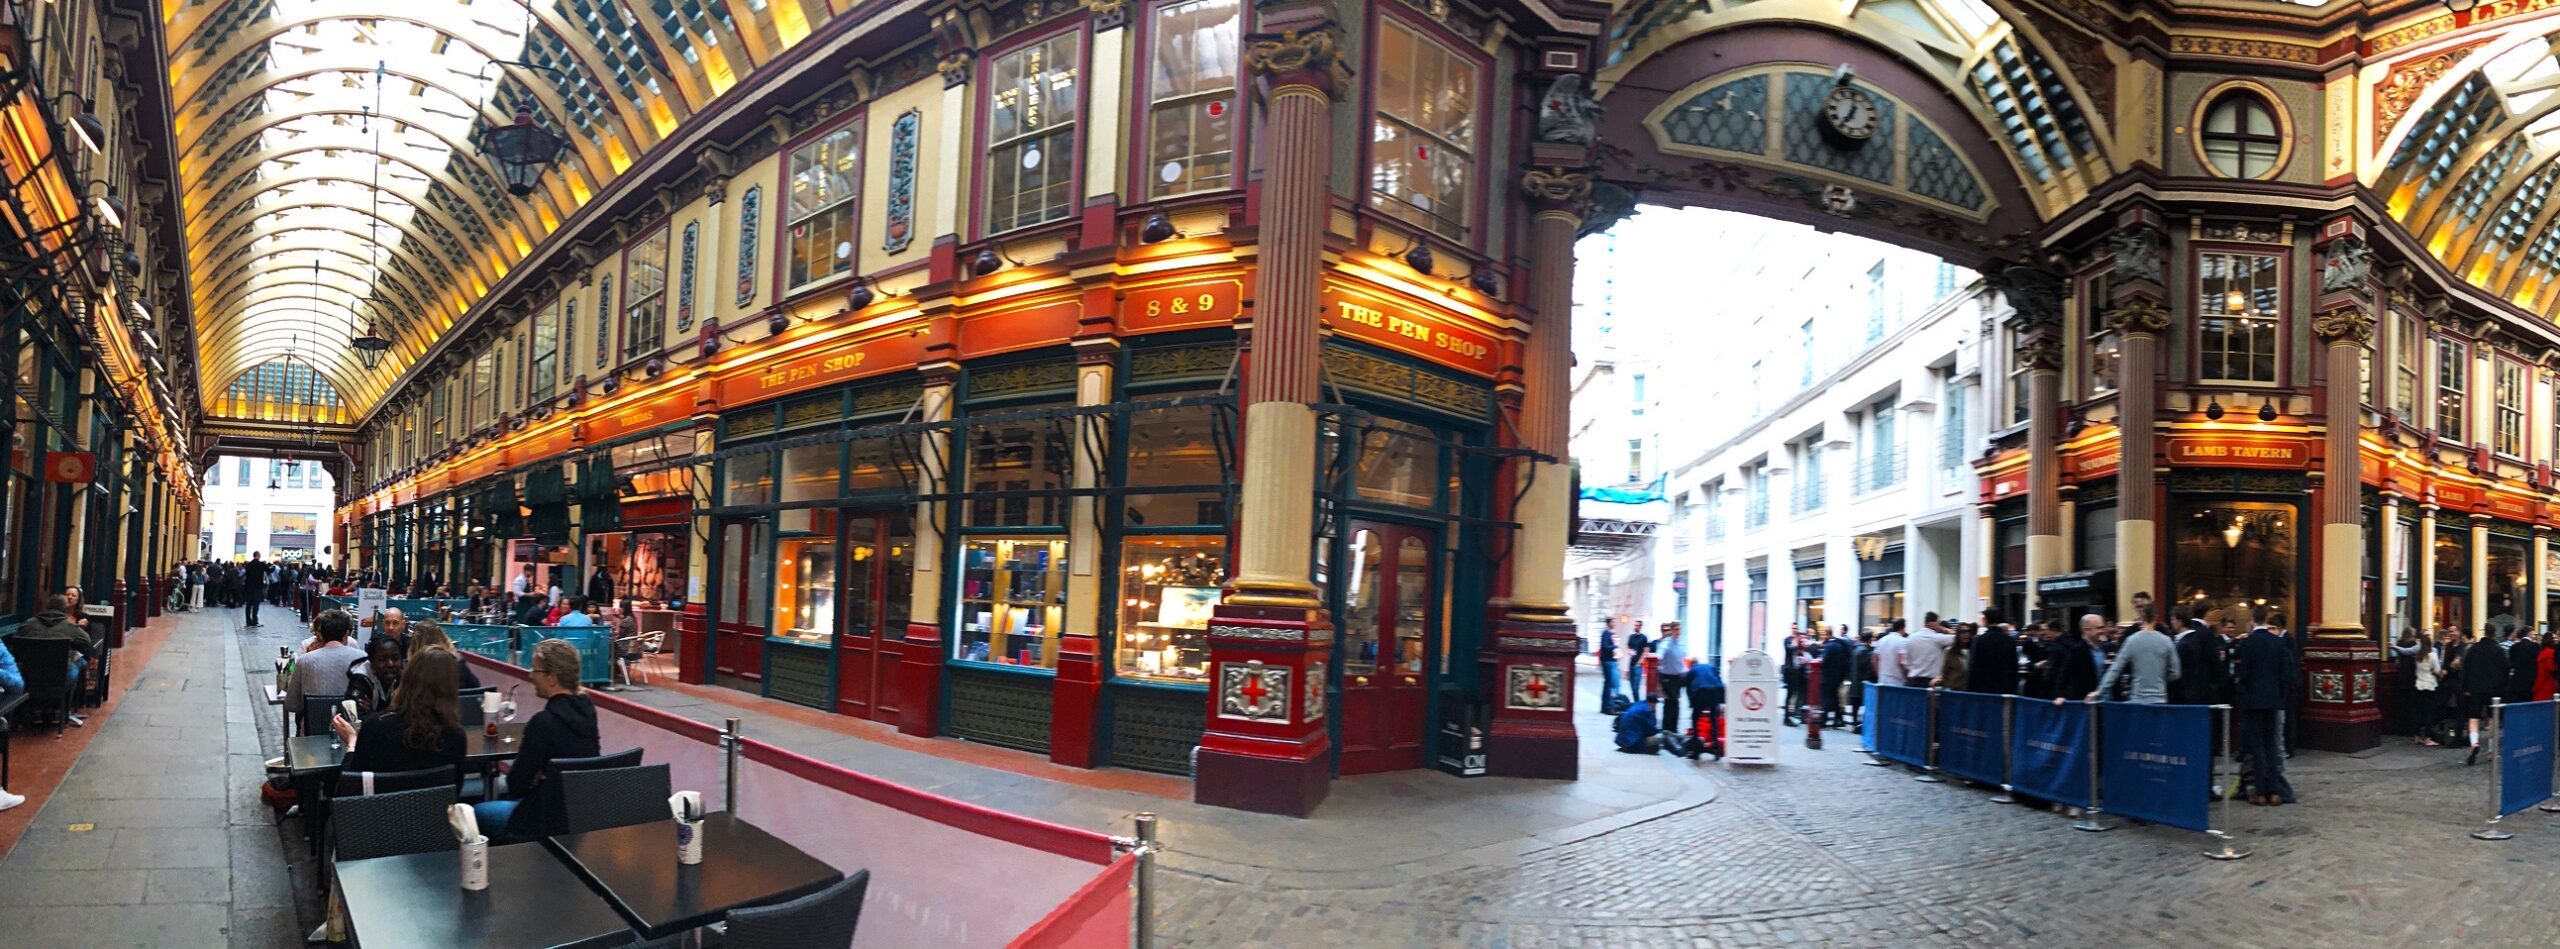 Panoramic photo of the interior of London's Leadenhall Market - Best Places to Visit in London